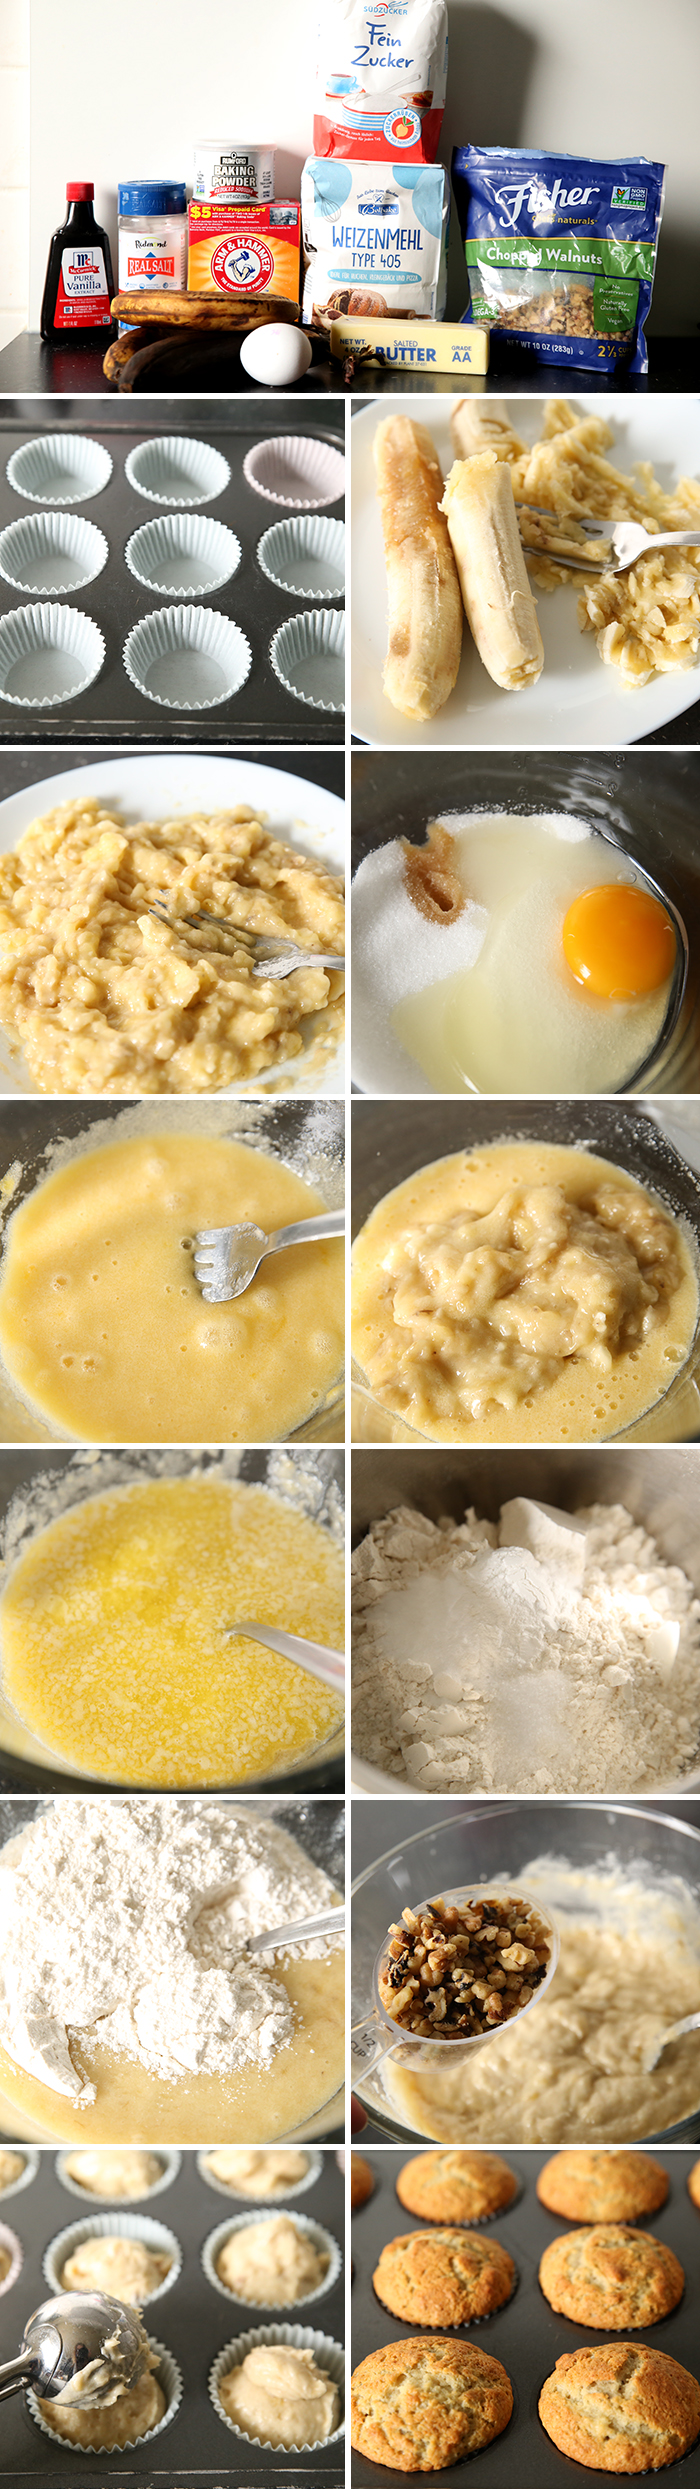 13-photo picture collage of step-by-step photos on how to make Banana Nut Muffins.